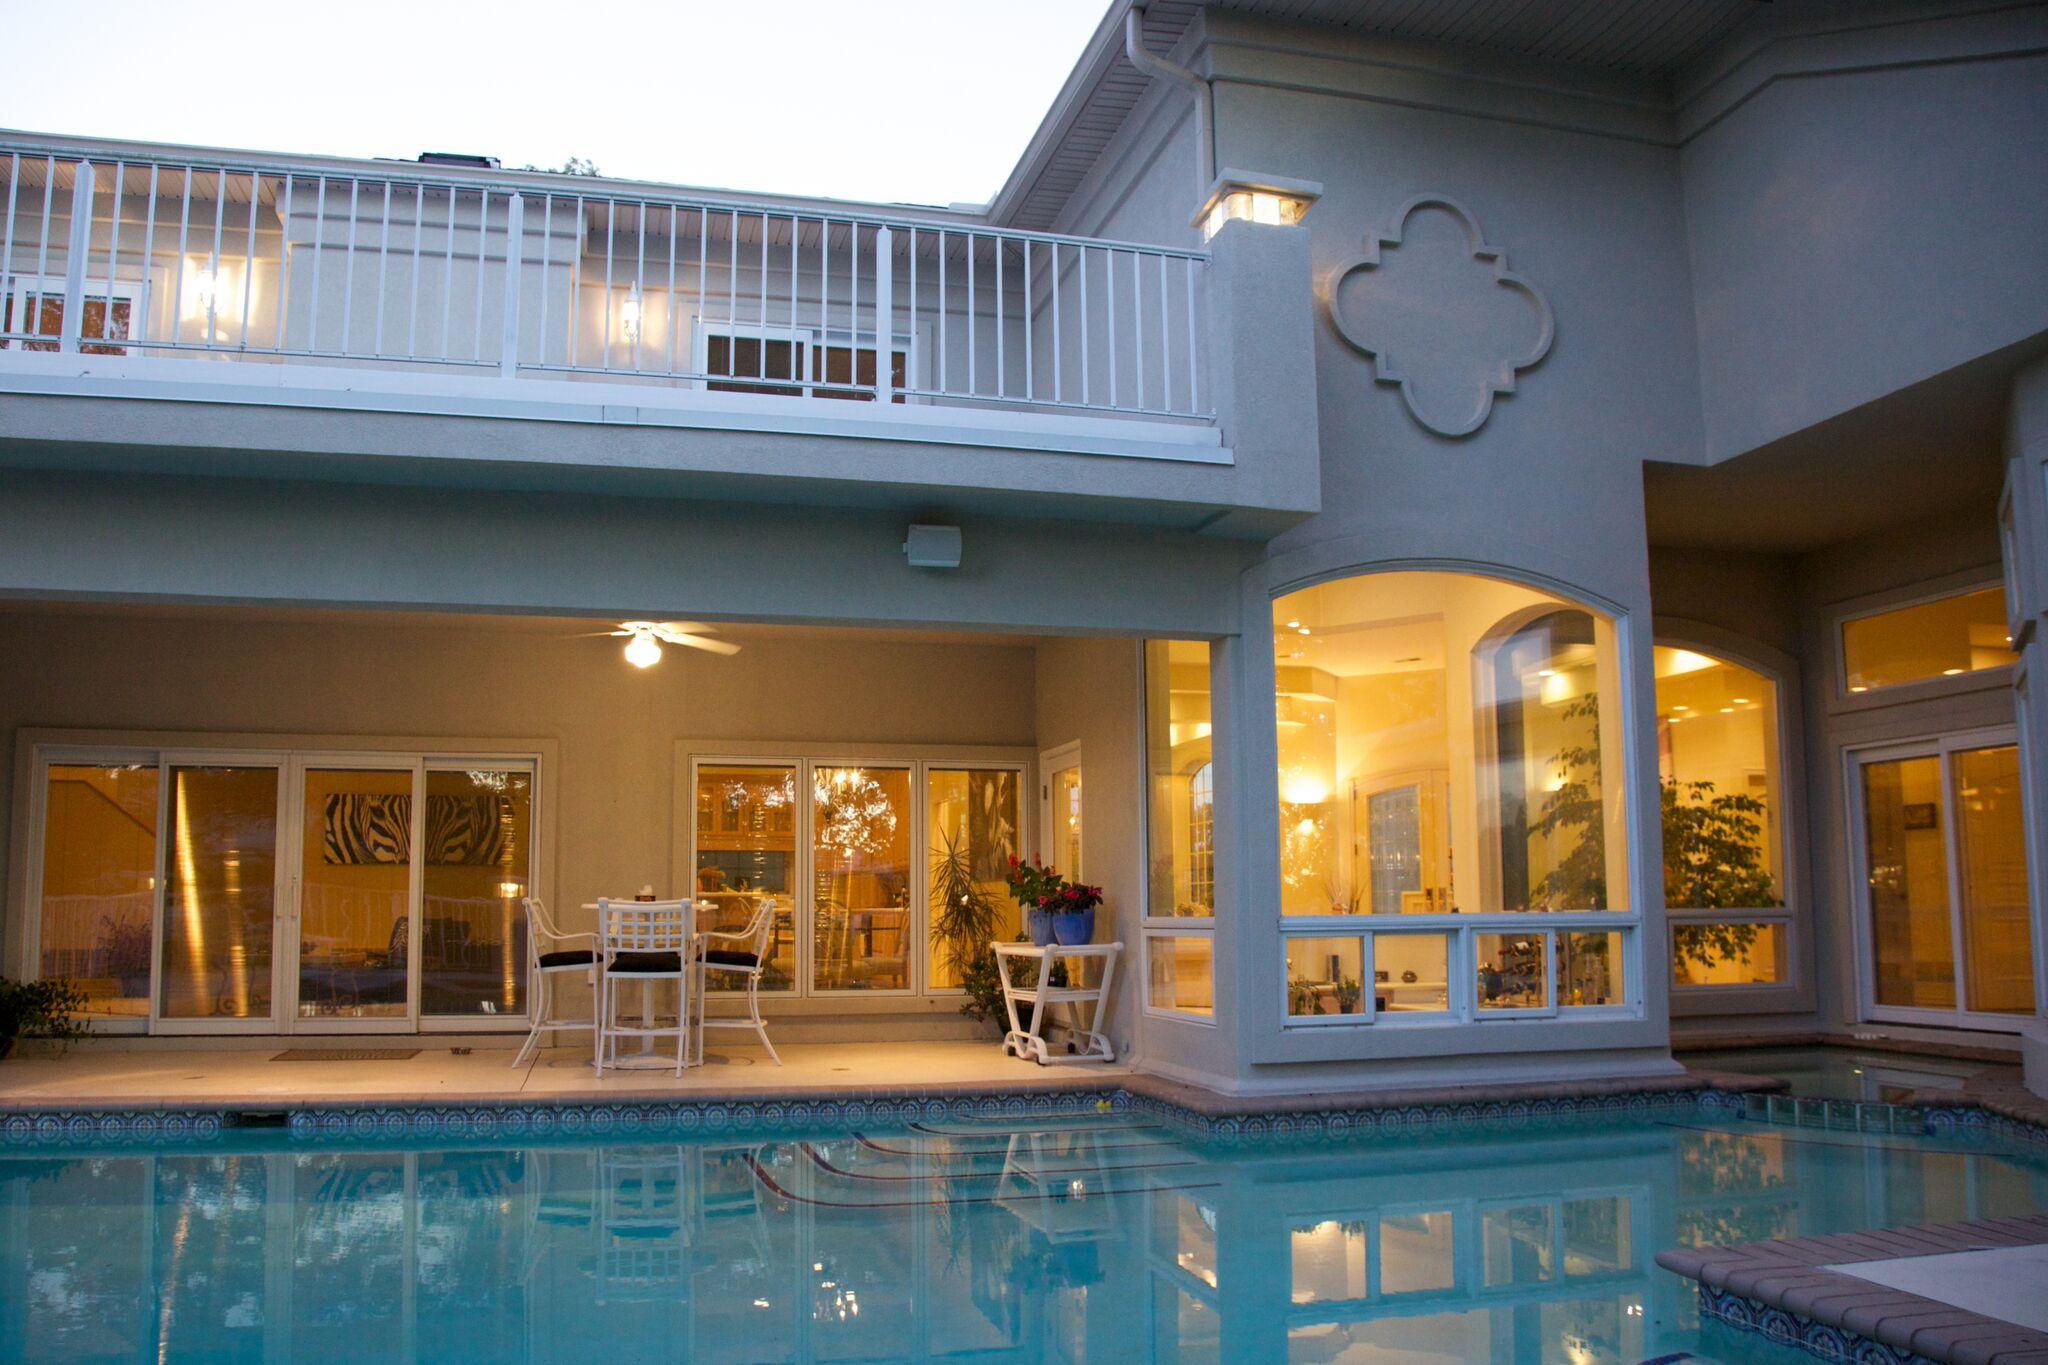 Covered patio overlooks the sparking swimming pool. 